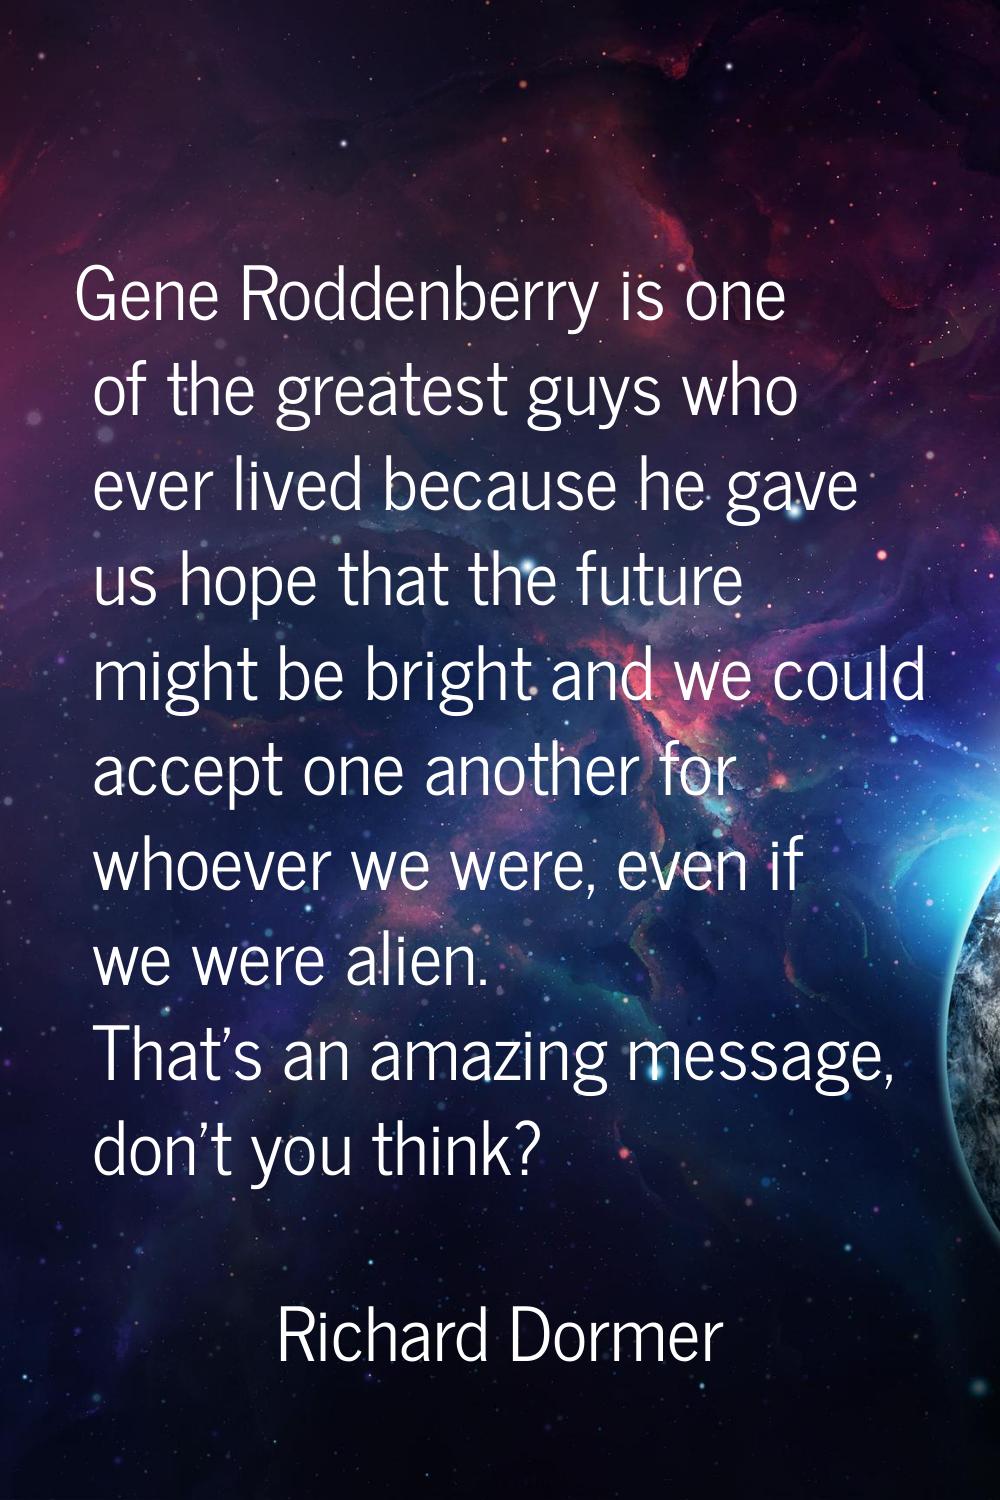 Gene Roddenberry is one of the greatest guys who ever lived because he gave us hope that the future